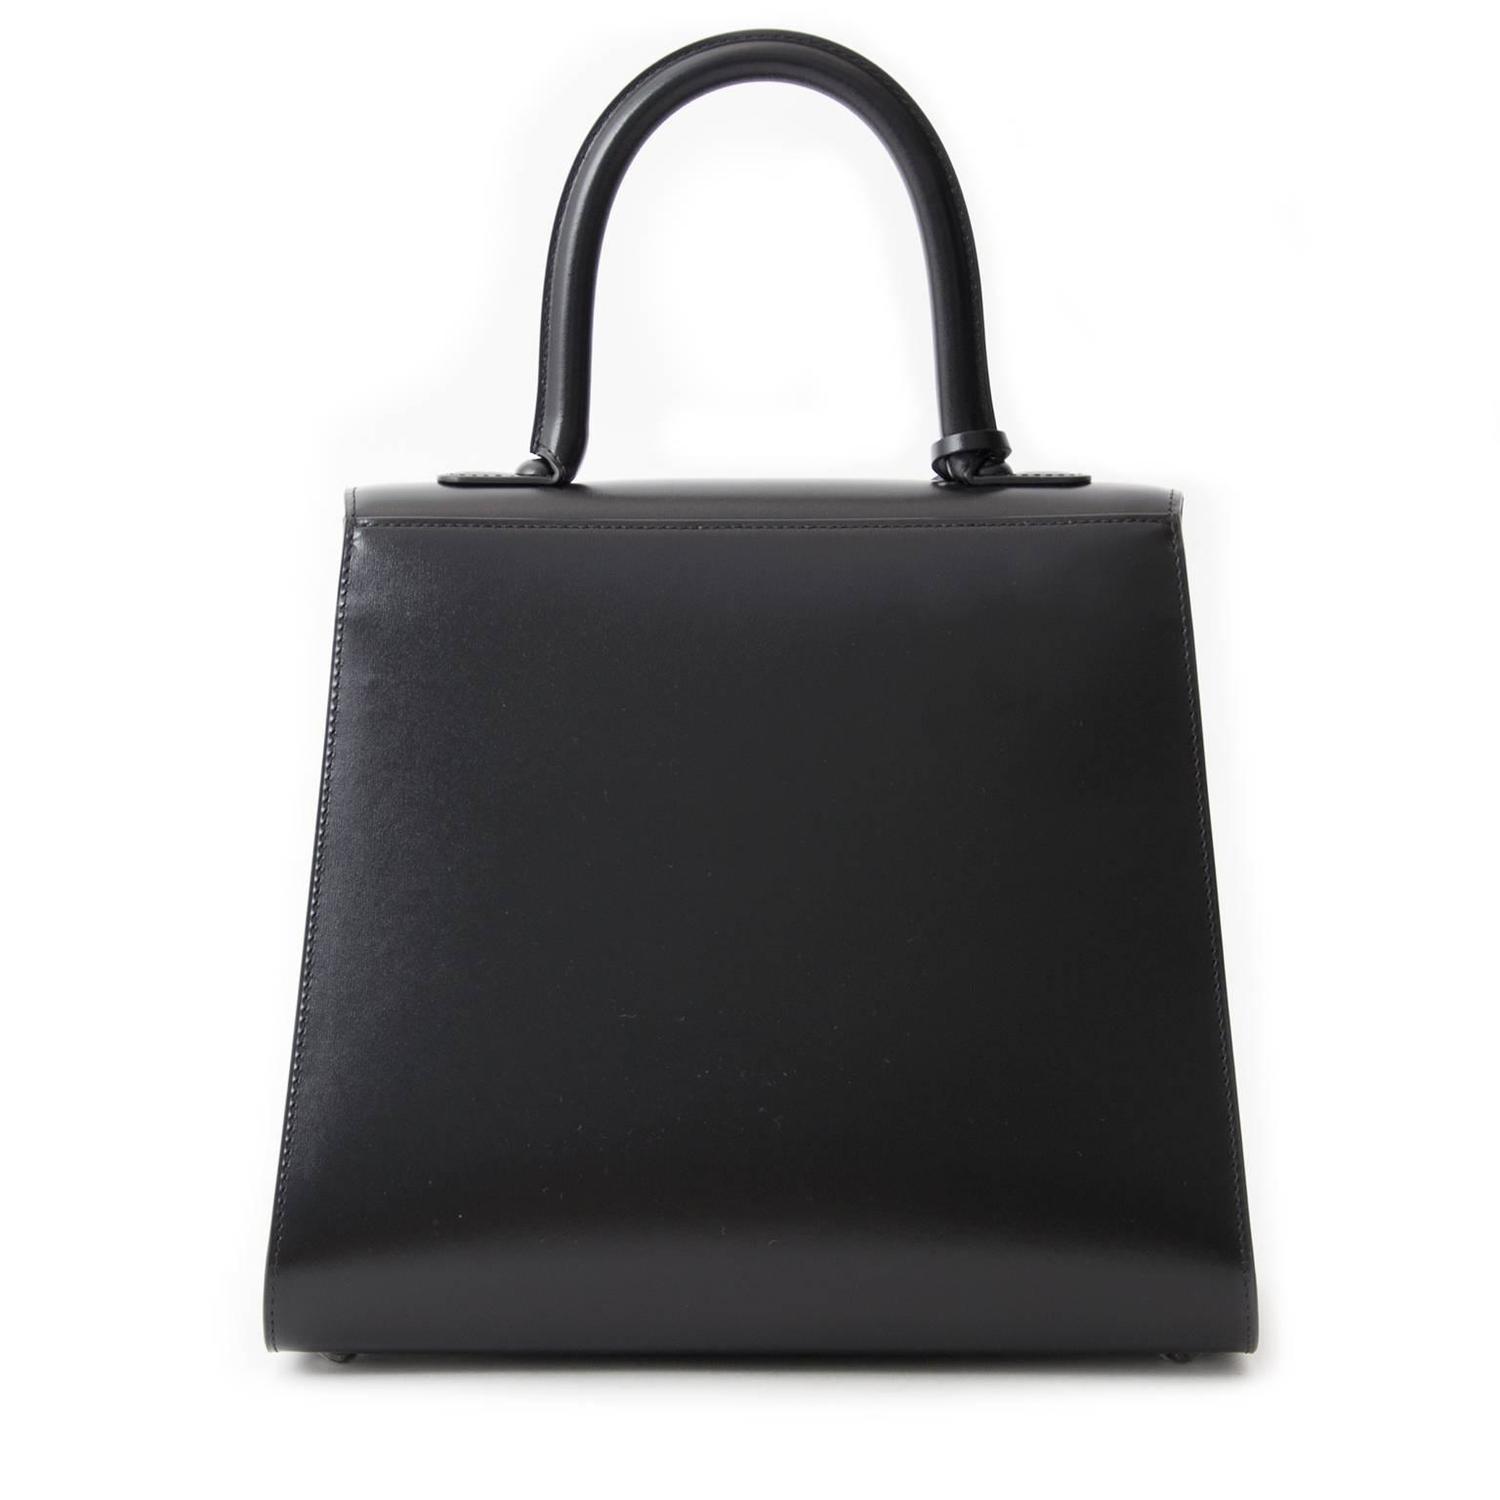 Brand New Delvaux Brillant L'Humour MM For Sale at 1stdibs